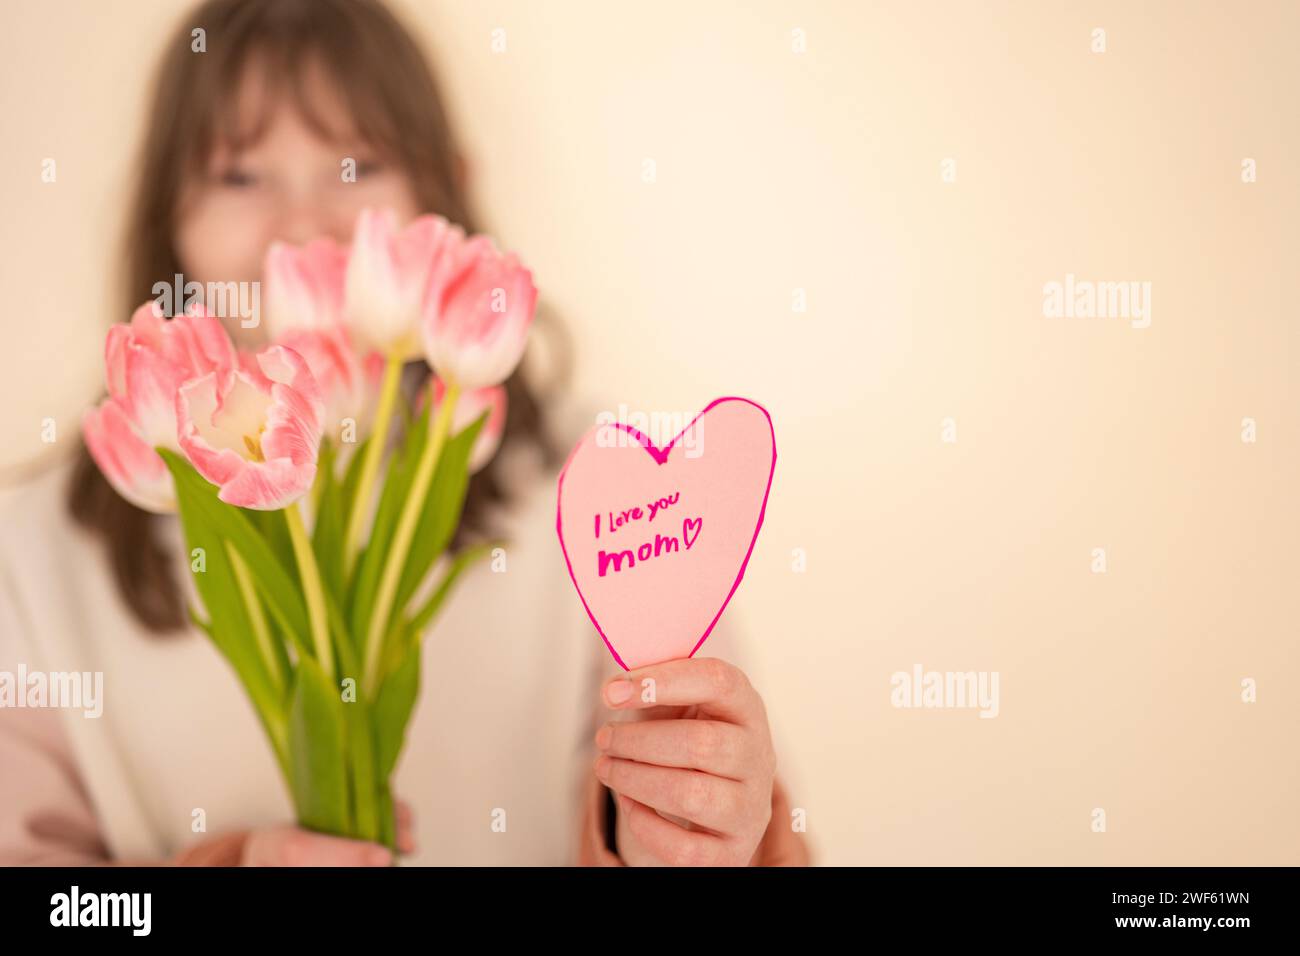 Mothers Day.Smiling daughter with flowers and card on a beige background.Laughing girl with tulips and heart card.Pink heart card and pink tulips Stock Photo